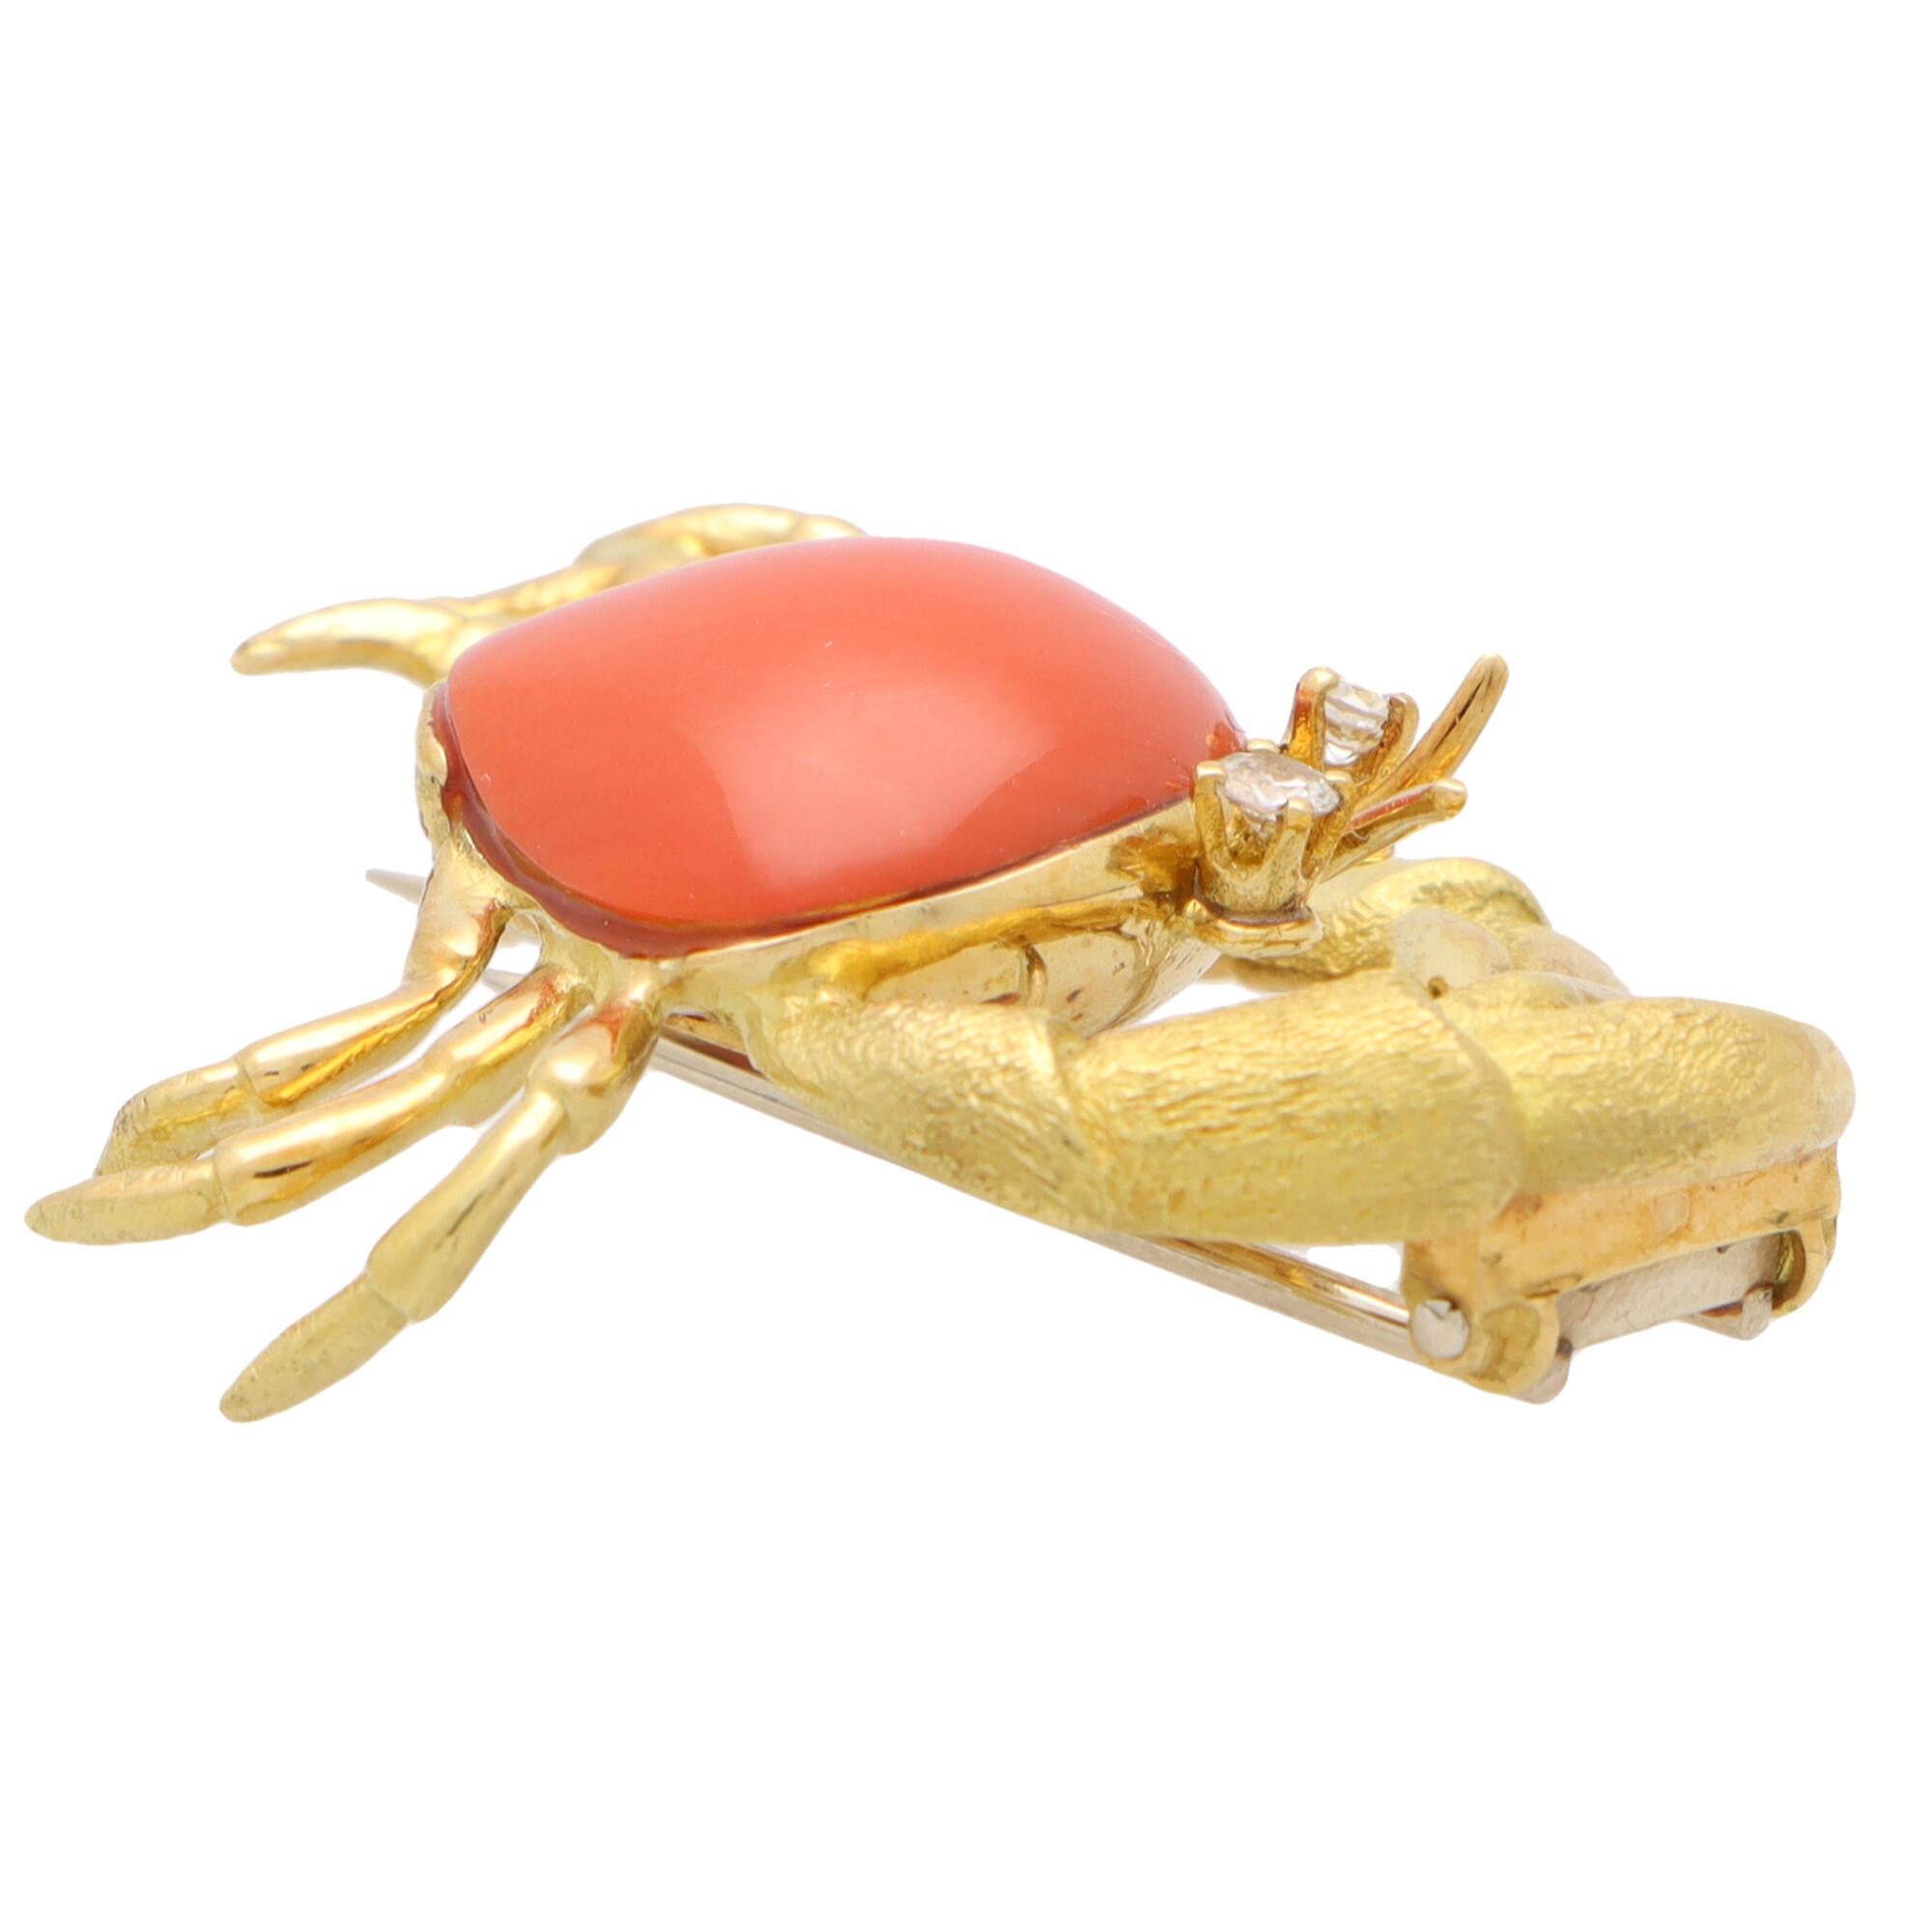 Retro Vintage Tiffany & Co. Coral and Diamond Crab Brooch Pin Set in 18k Yellow Gold